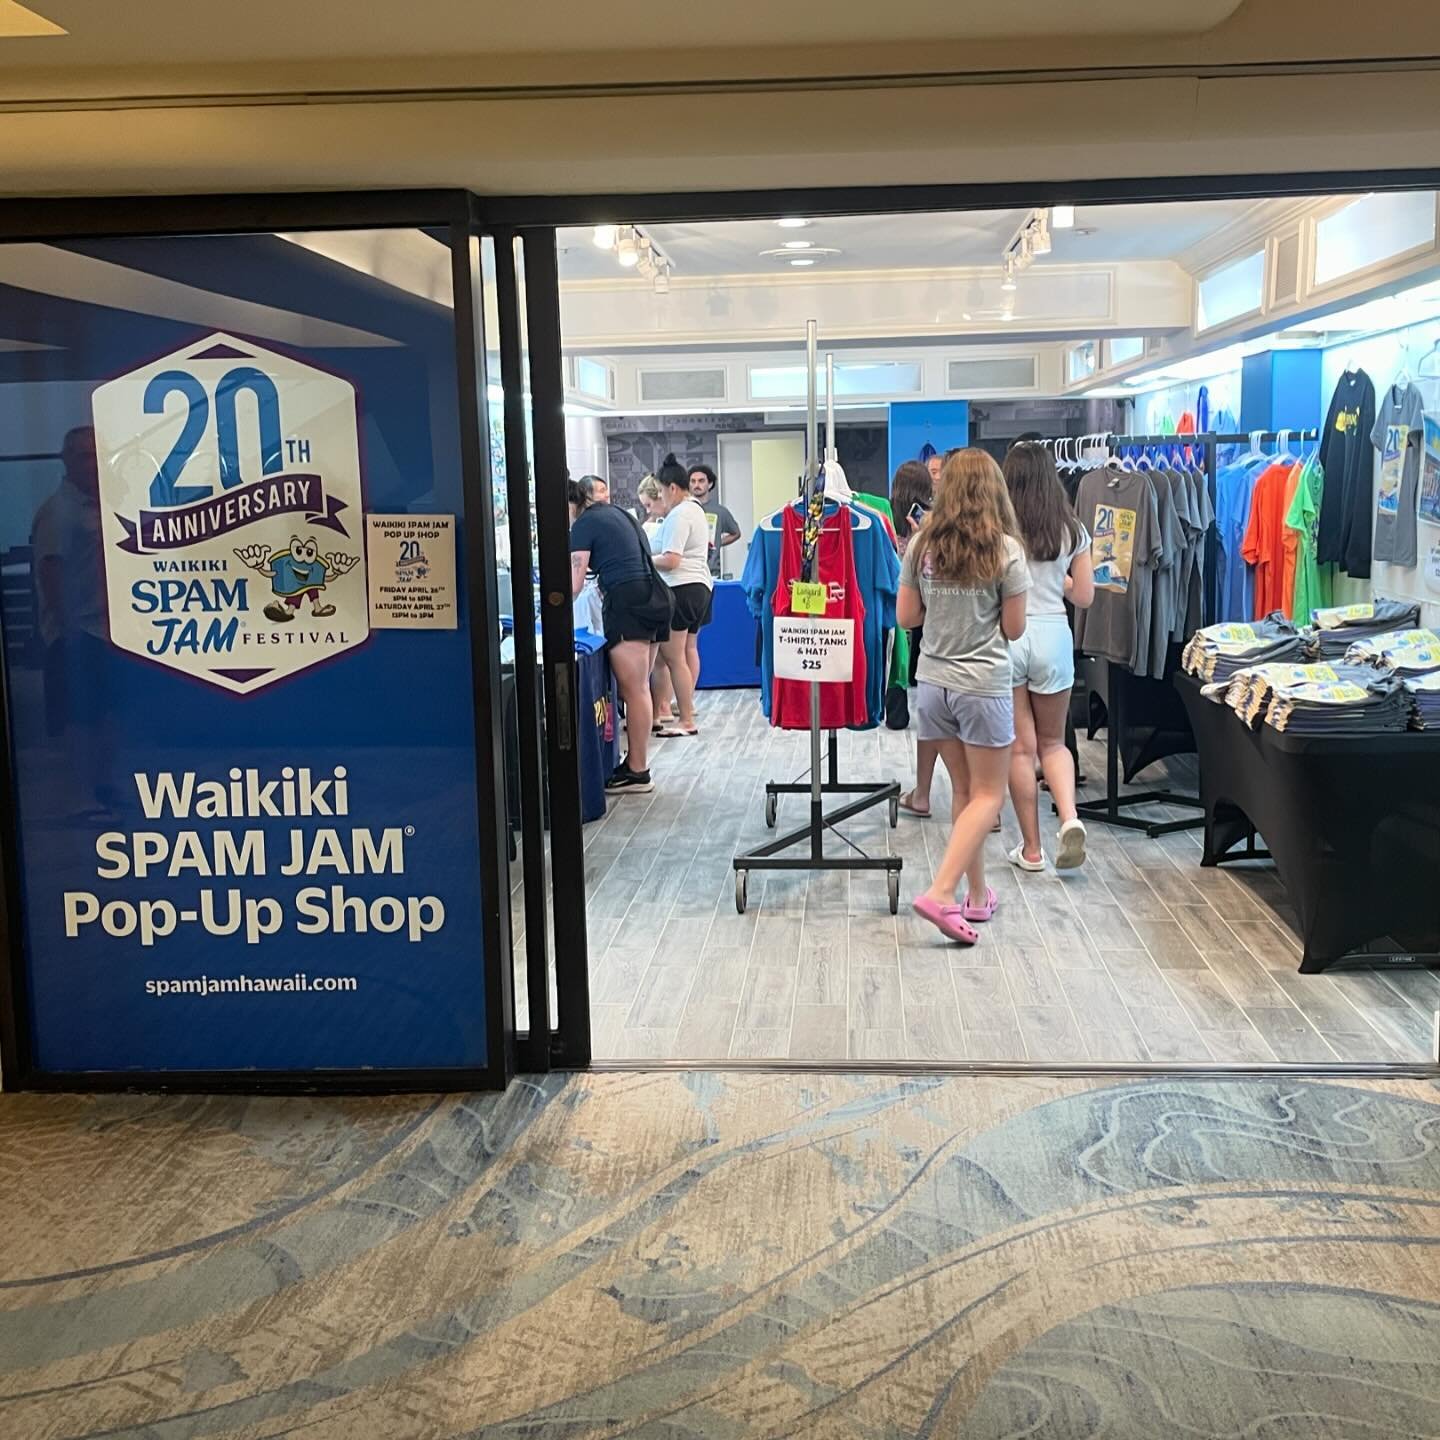 Our Pop Up Shop is open! We are located in the OUTRIGGER Waikiki Hotel near the Bell Desk on the 1st floor. 
.
Hours of operation:
April 26 3:00pm - 8:00pm
April 27 12:00pm - 4:00pm 
.
https://www.spamjamhawaii.com/popup-shop